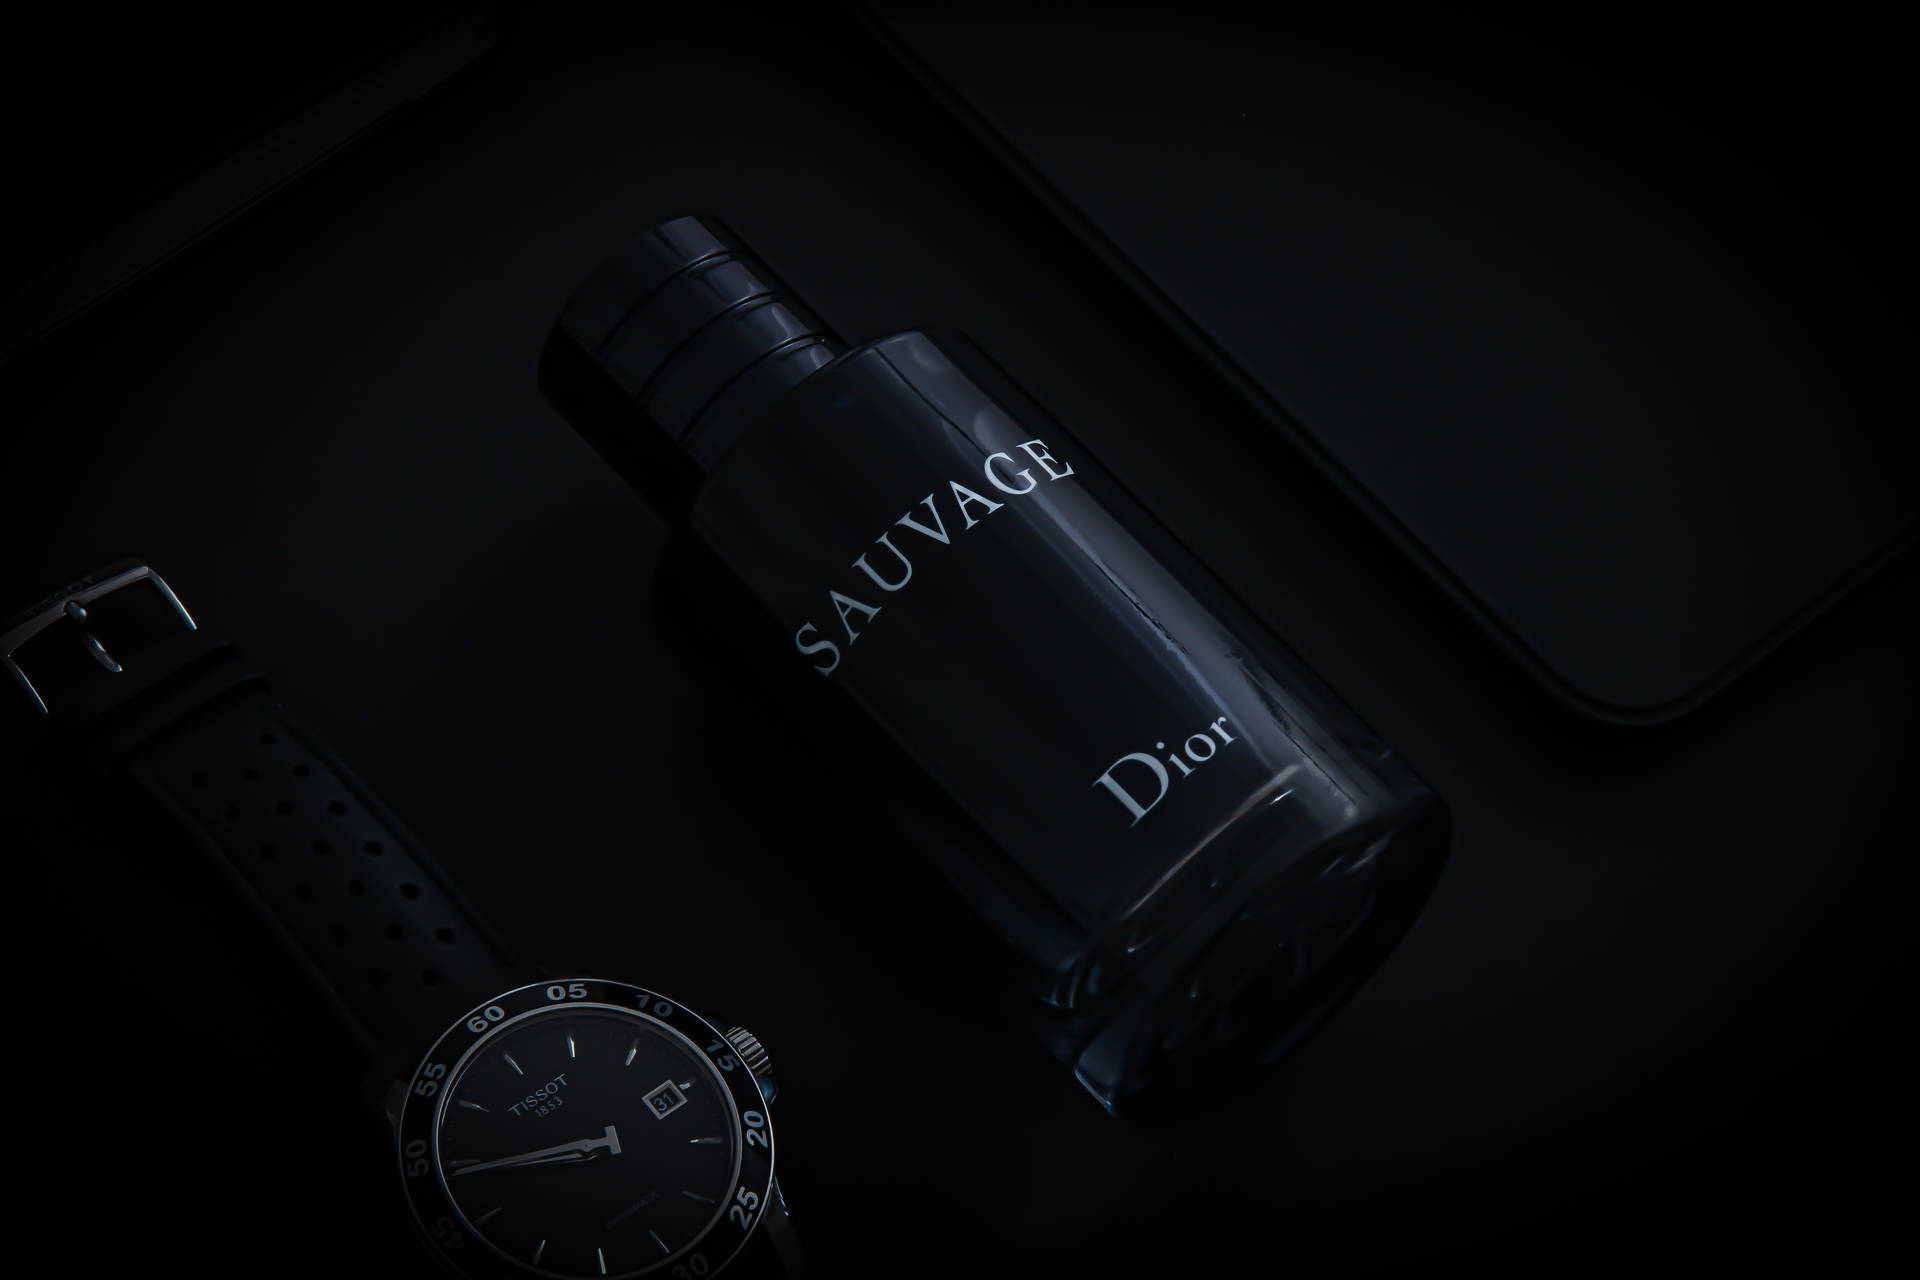 Dior 5184X3456 Wallpaper and Background Image